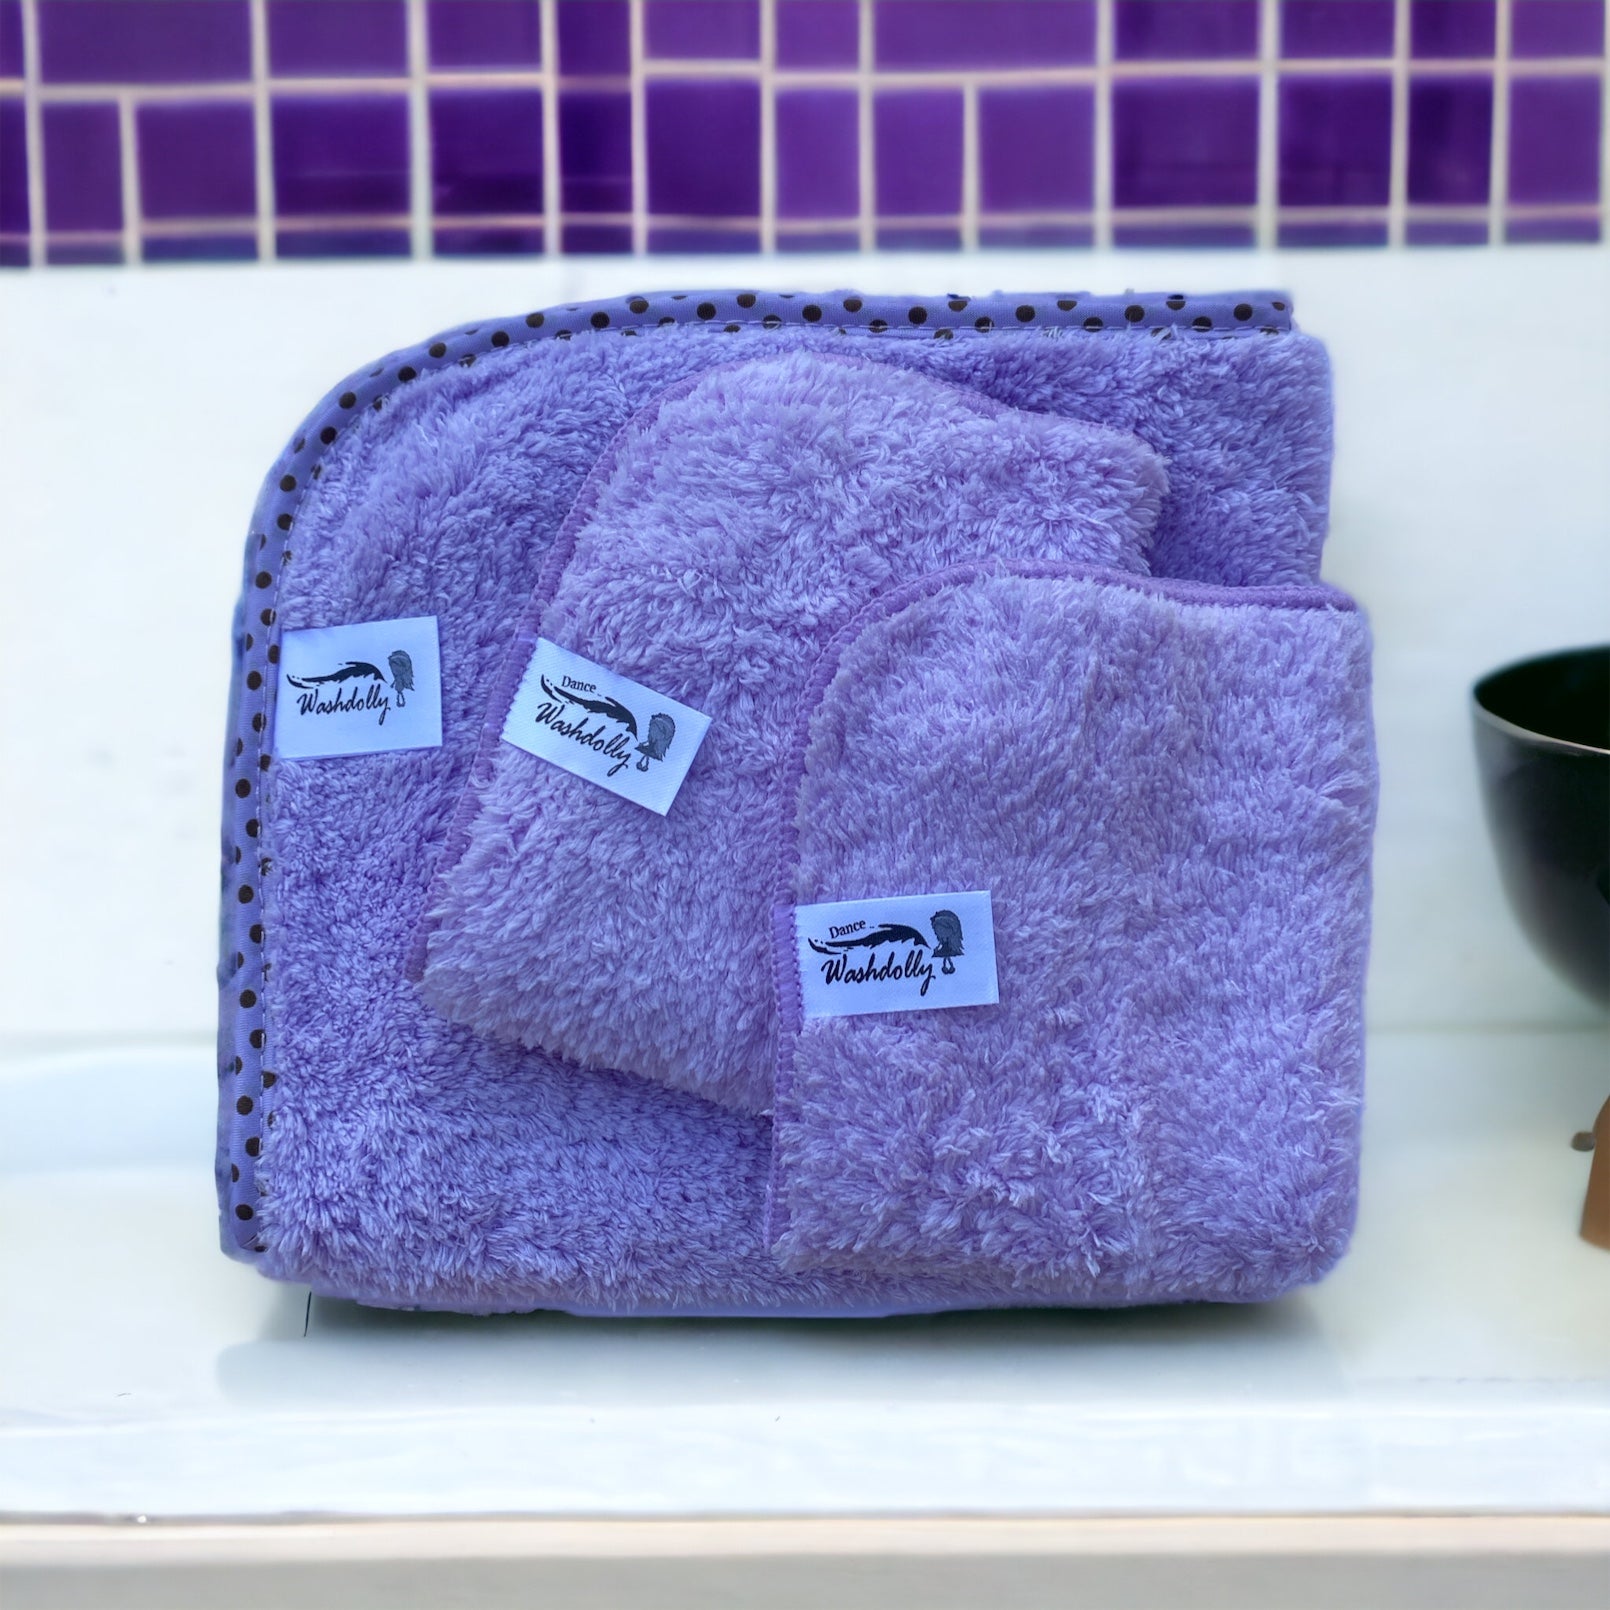 One Large and Two Small Washdolly cloths